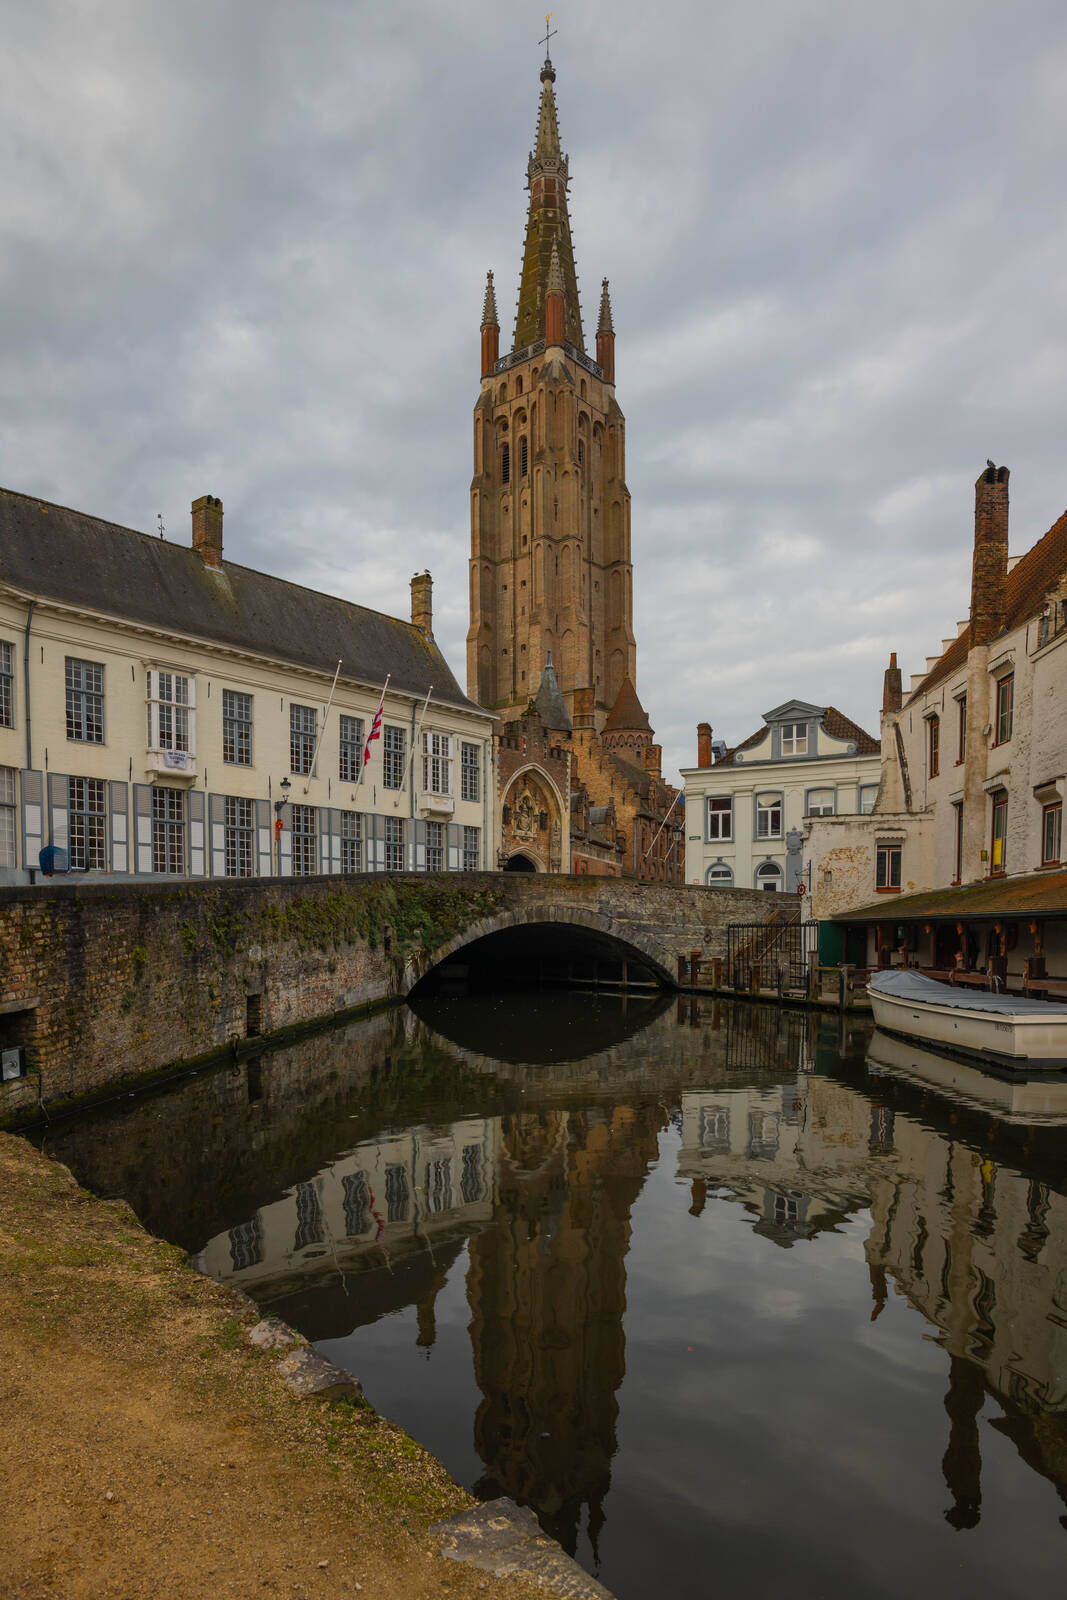 Image of Dijver Canal by michael bennett